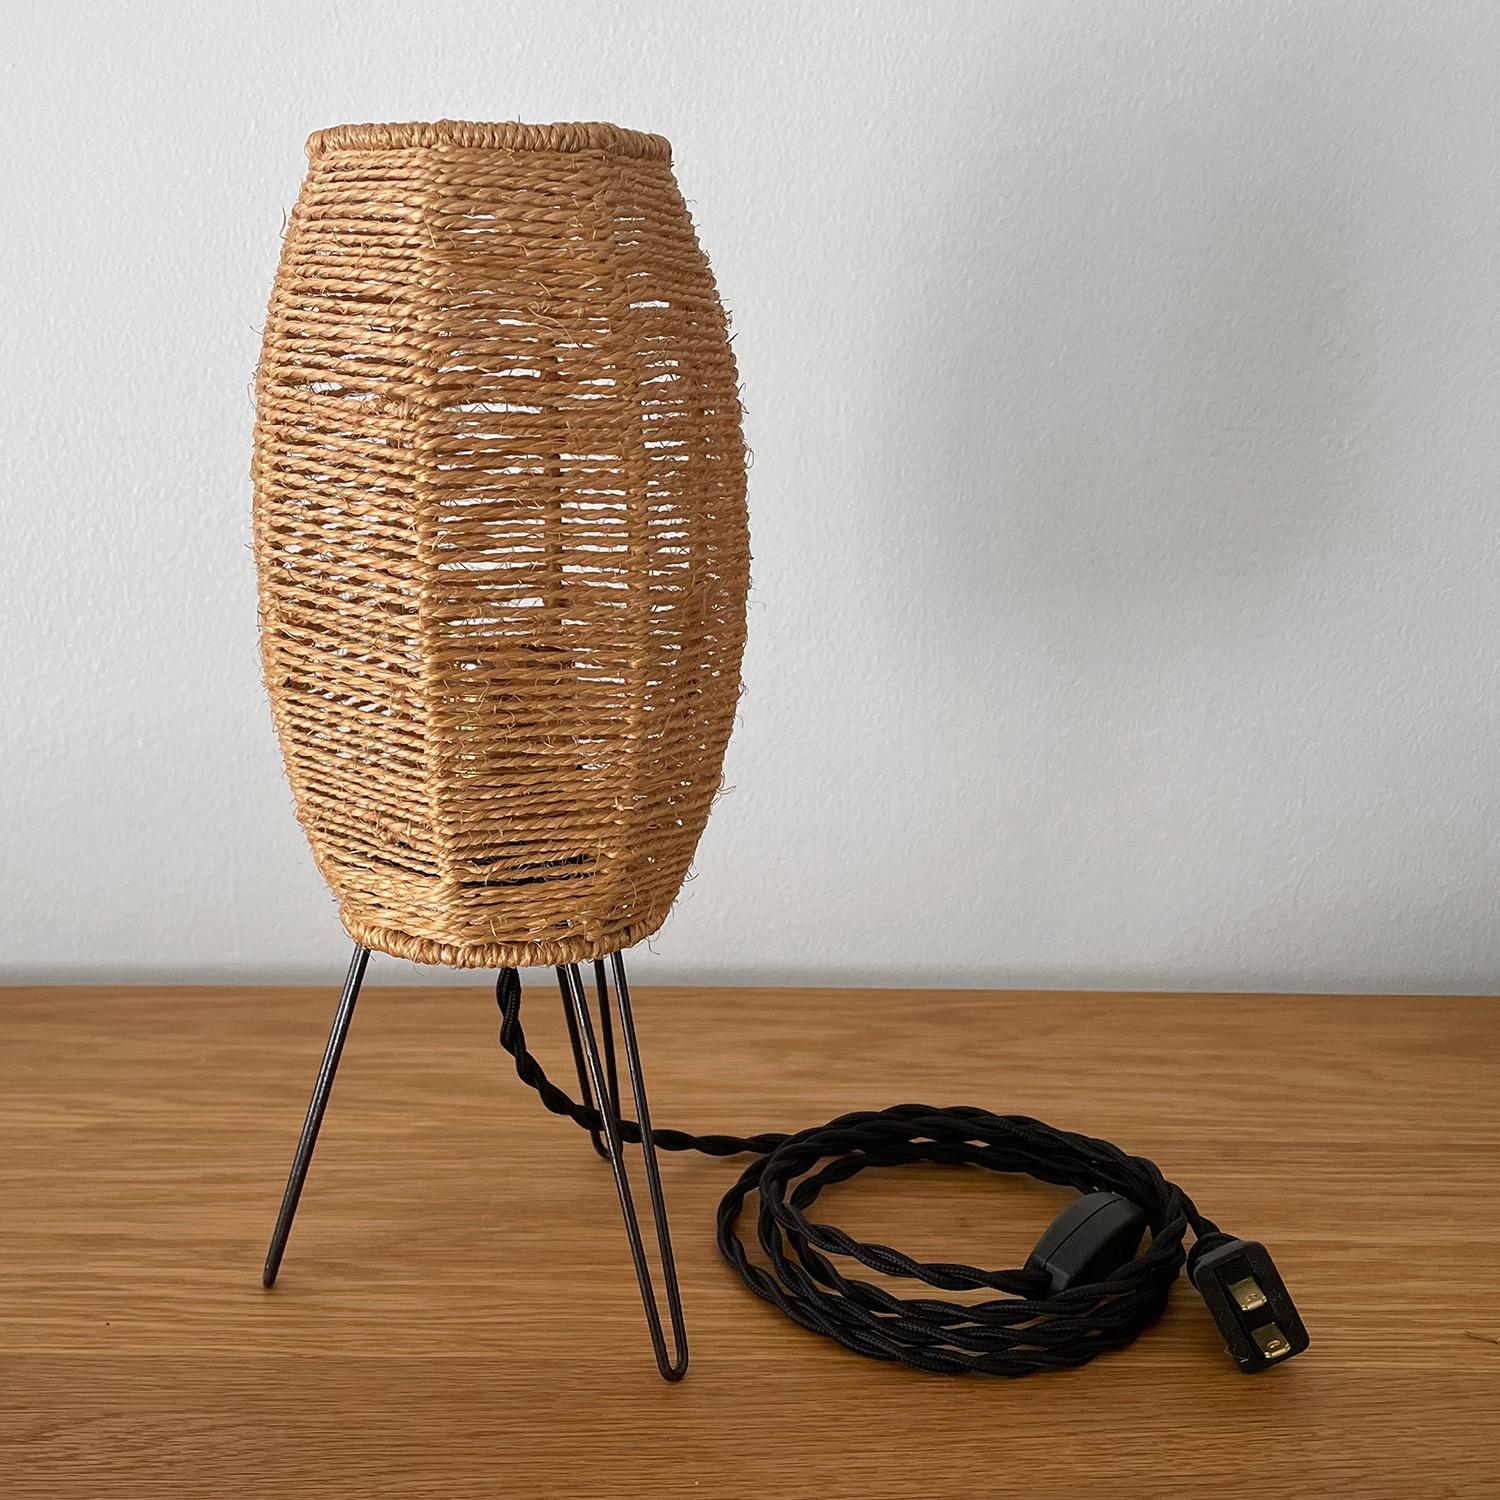 French midcentury tripod lamp
Impeccably woven jute strands band around the petite frame 
Minimalist hairpin legs 
Newly rewired
Black french twist silk cord
Cord length 5’ 8”